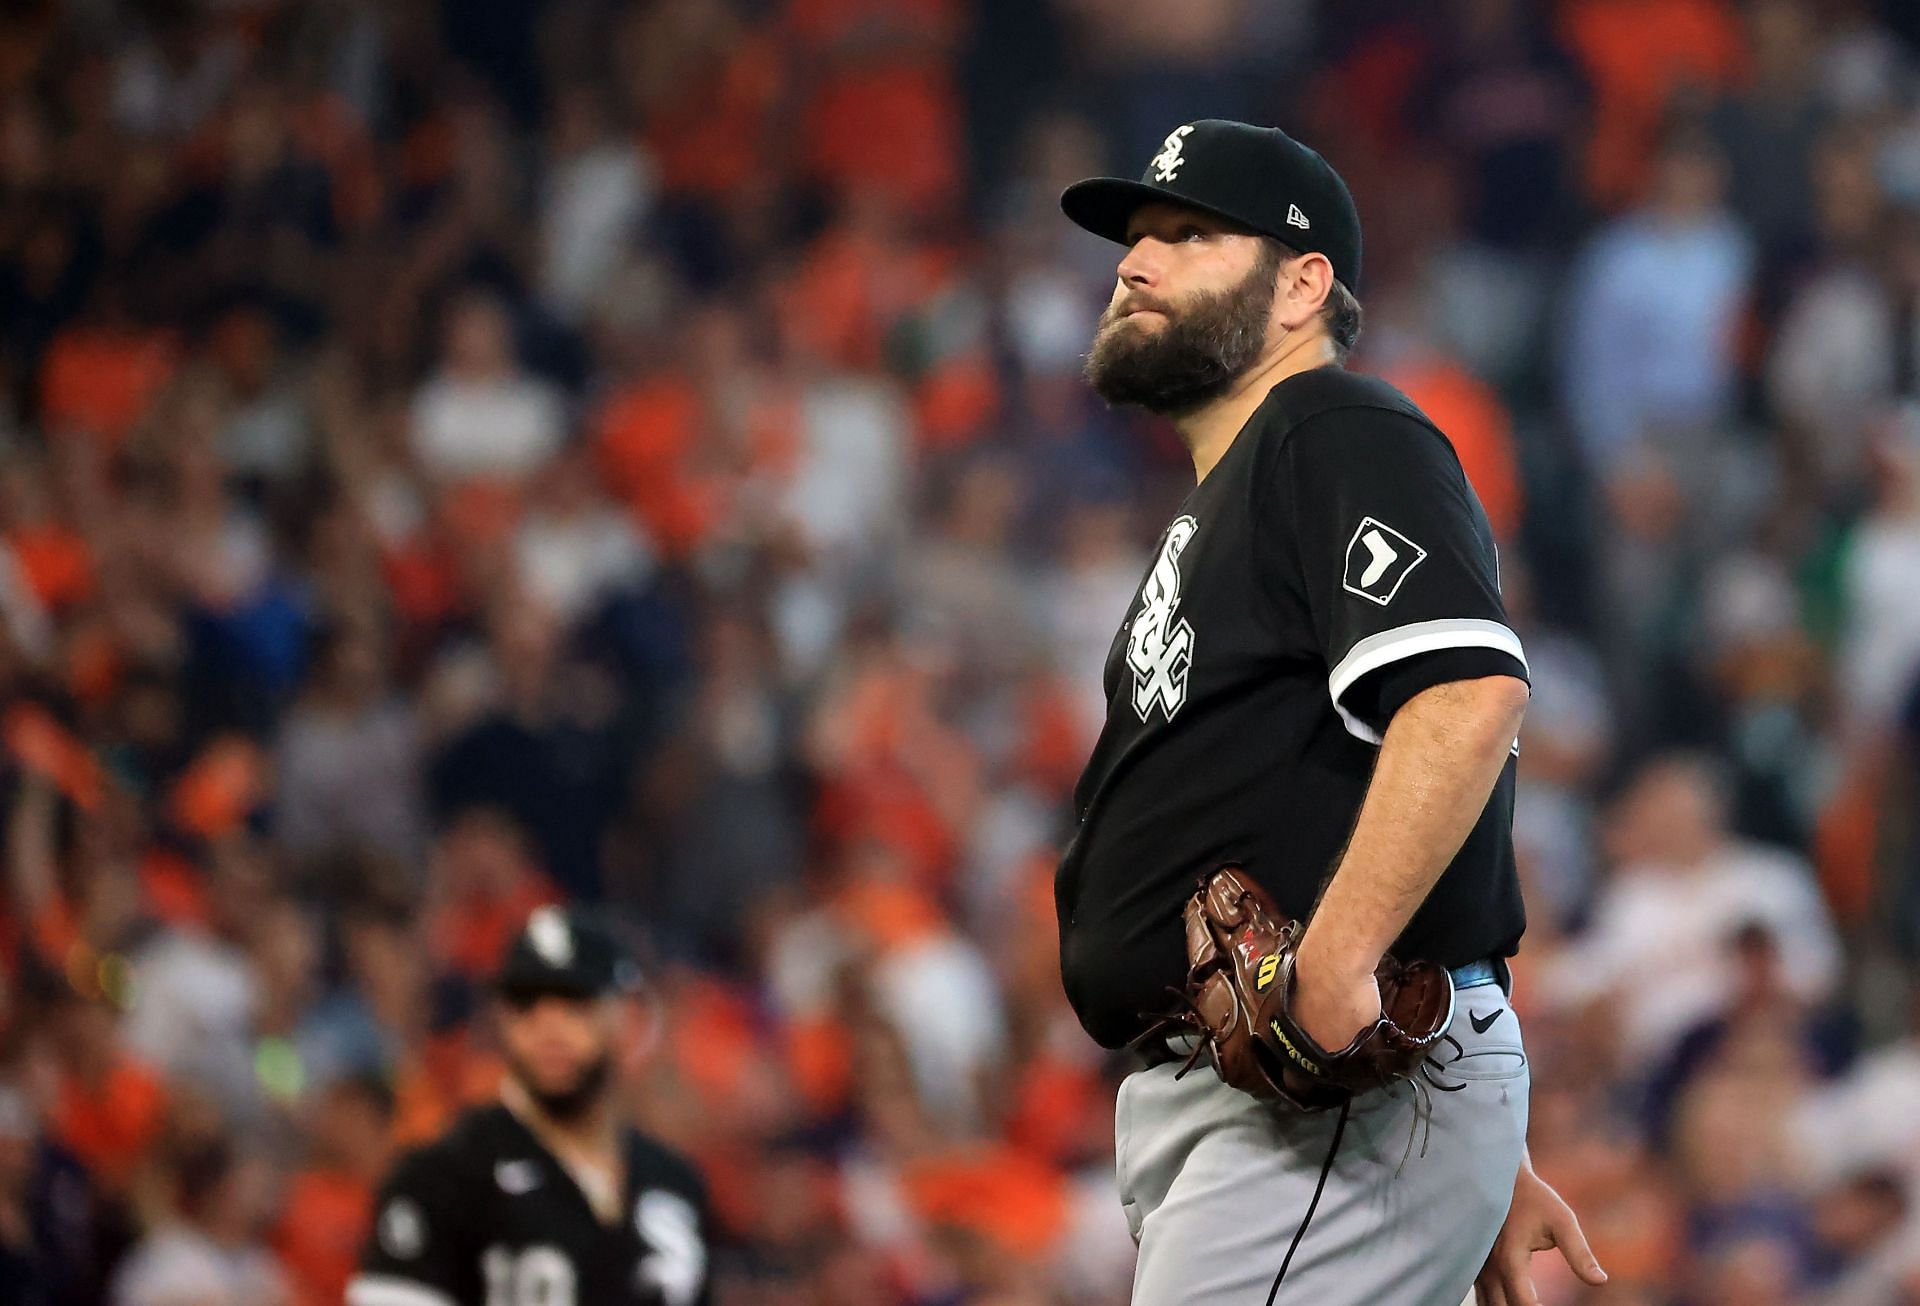 Top 10 starting pitchers in 2022 MLB Which ace will reign supreme?